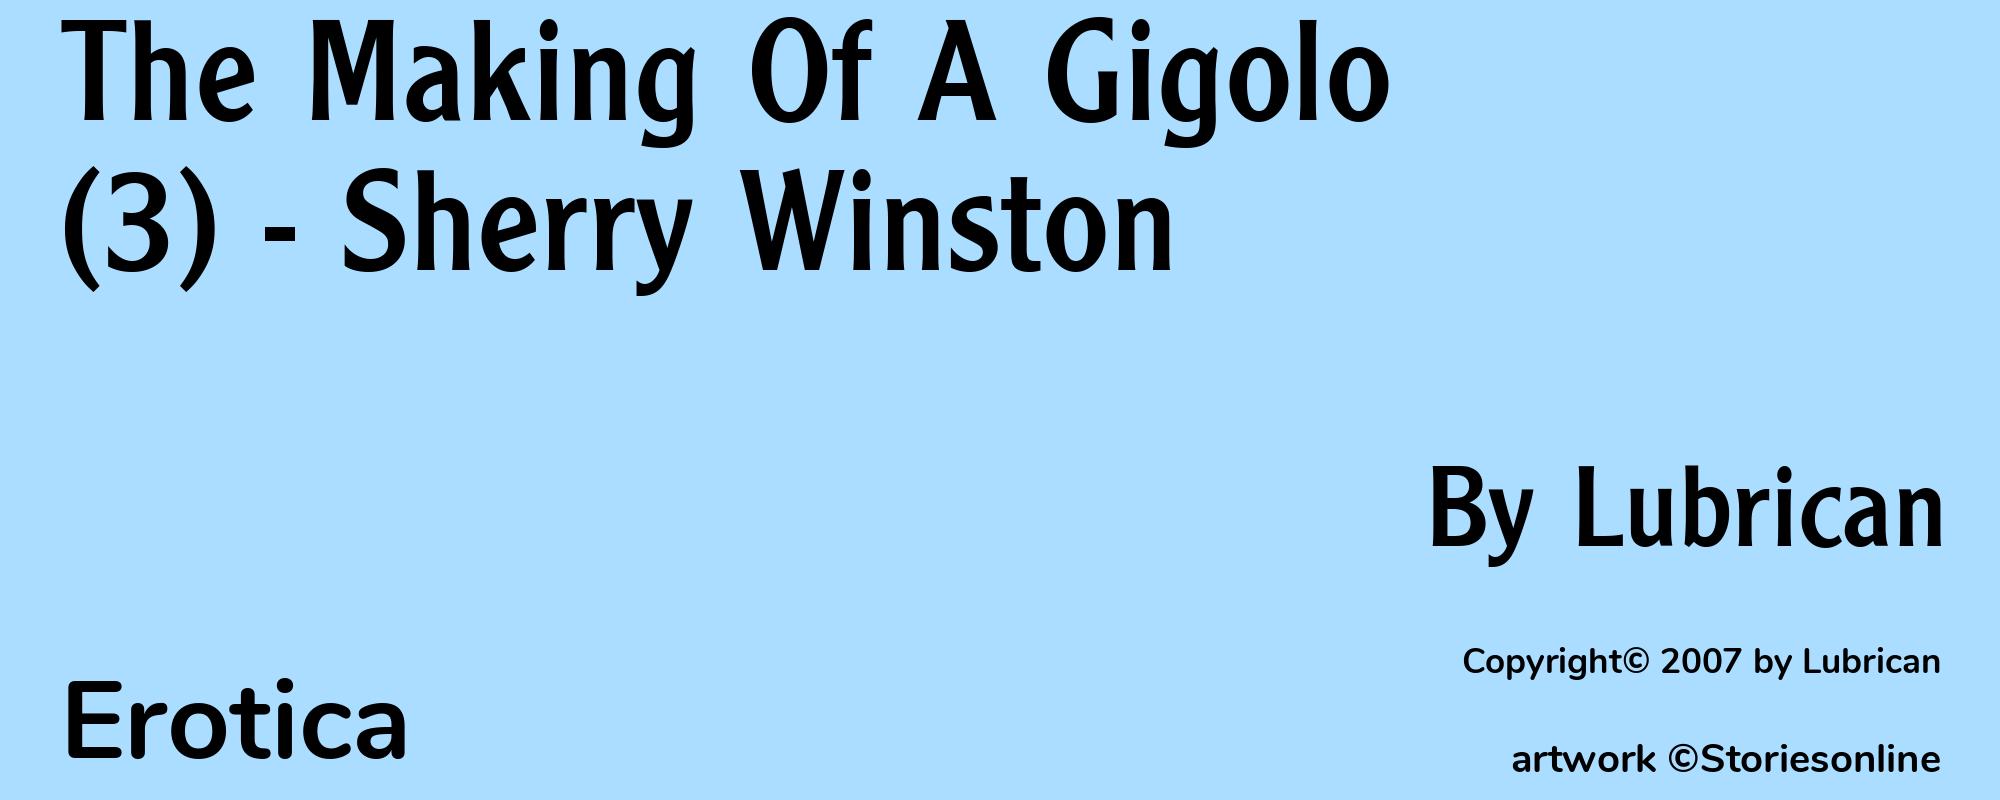 The Making Of A Gigolo (3) - Sherry Winston - Cover